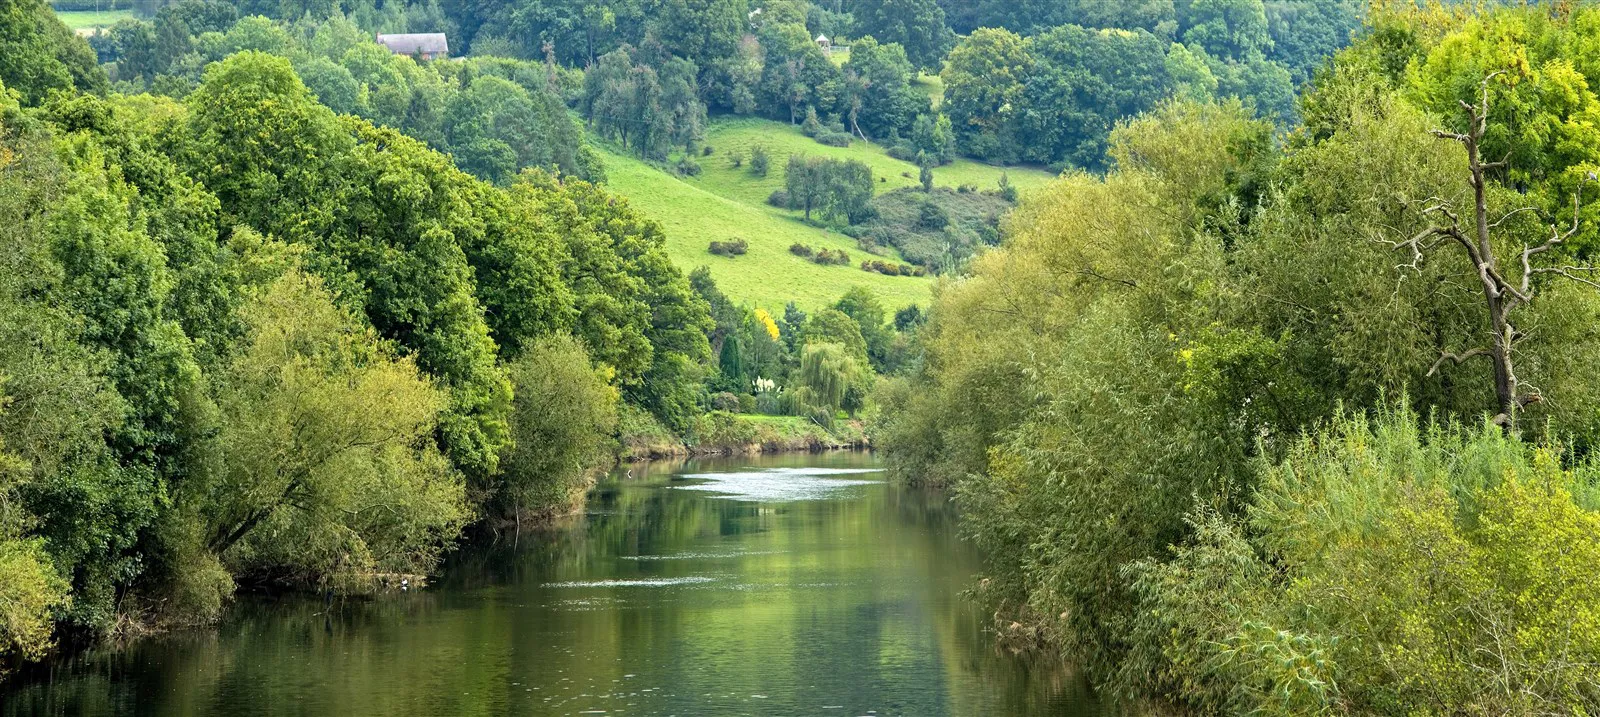 Wye River in Hay-on-Wye, Herefordshire